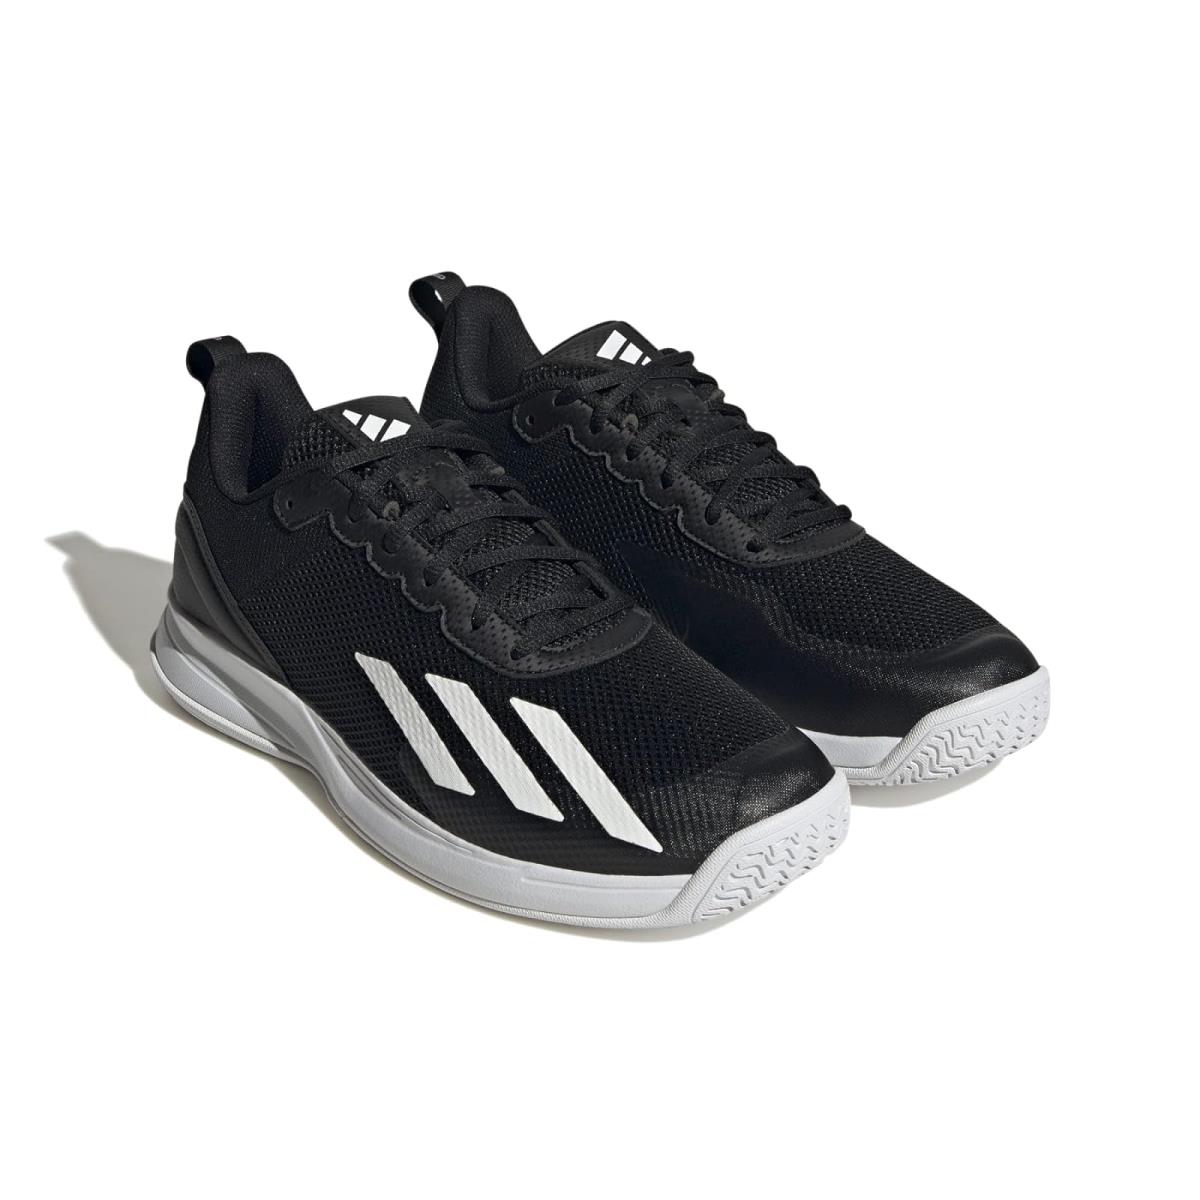 Man`s Sneakers Athletic Shoes Adidas Courtflash Speed Core Black/Footwear White/Matte Silver